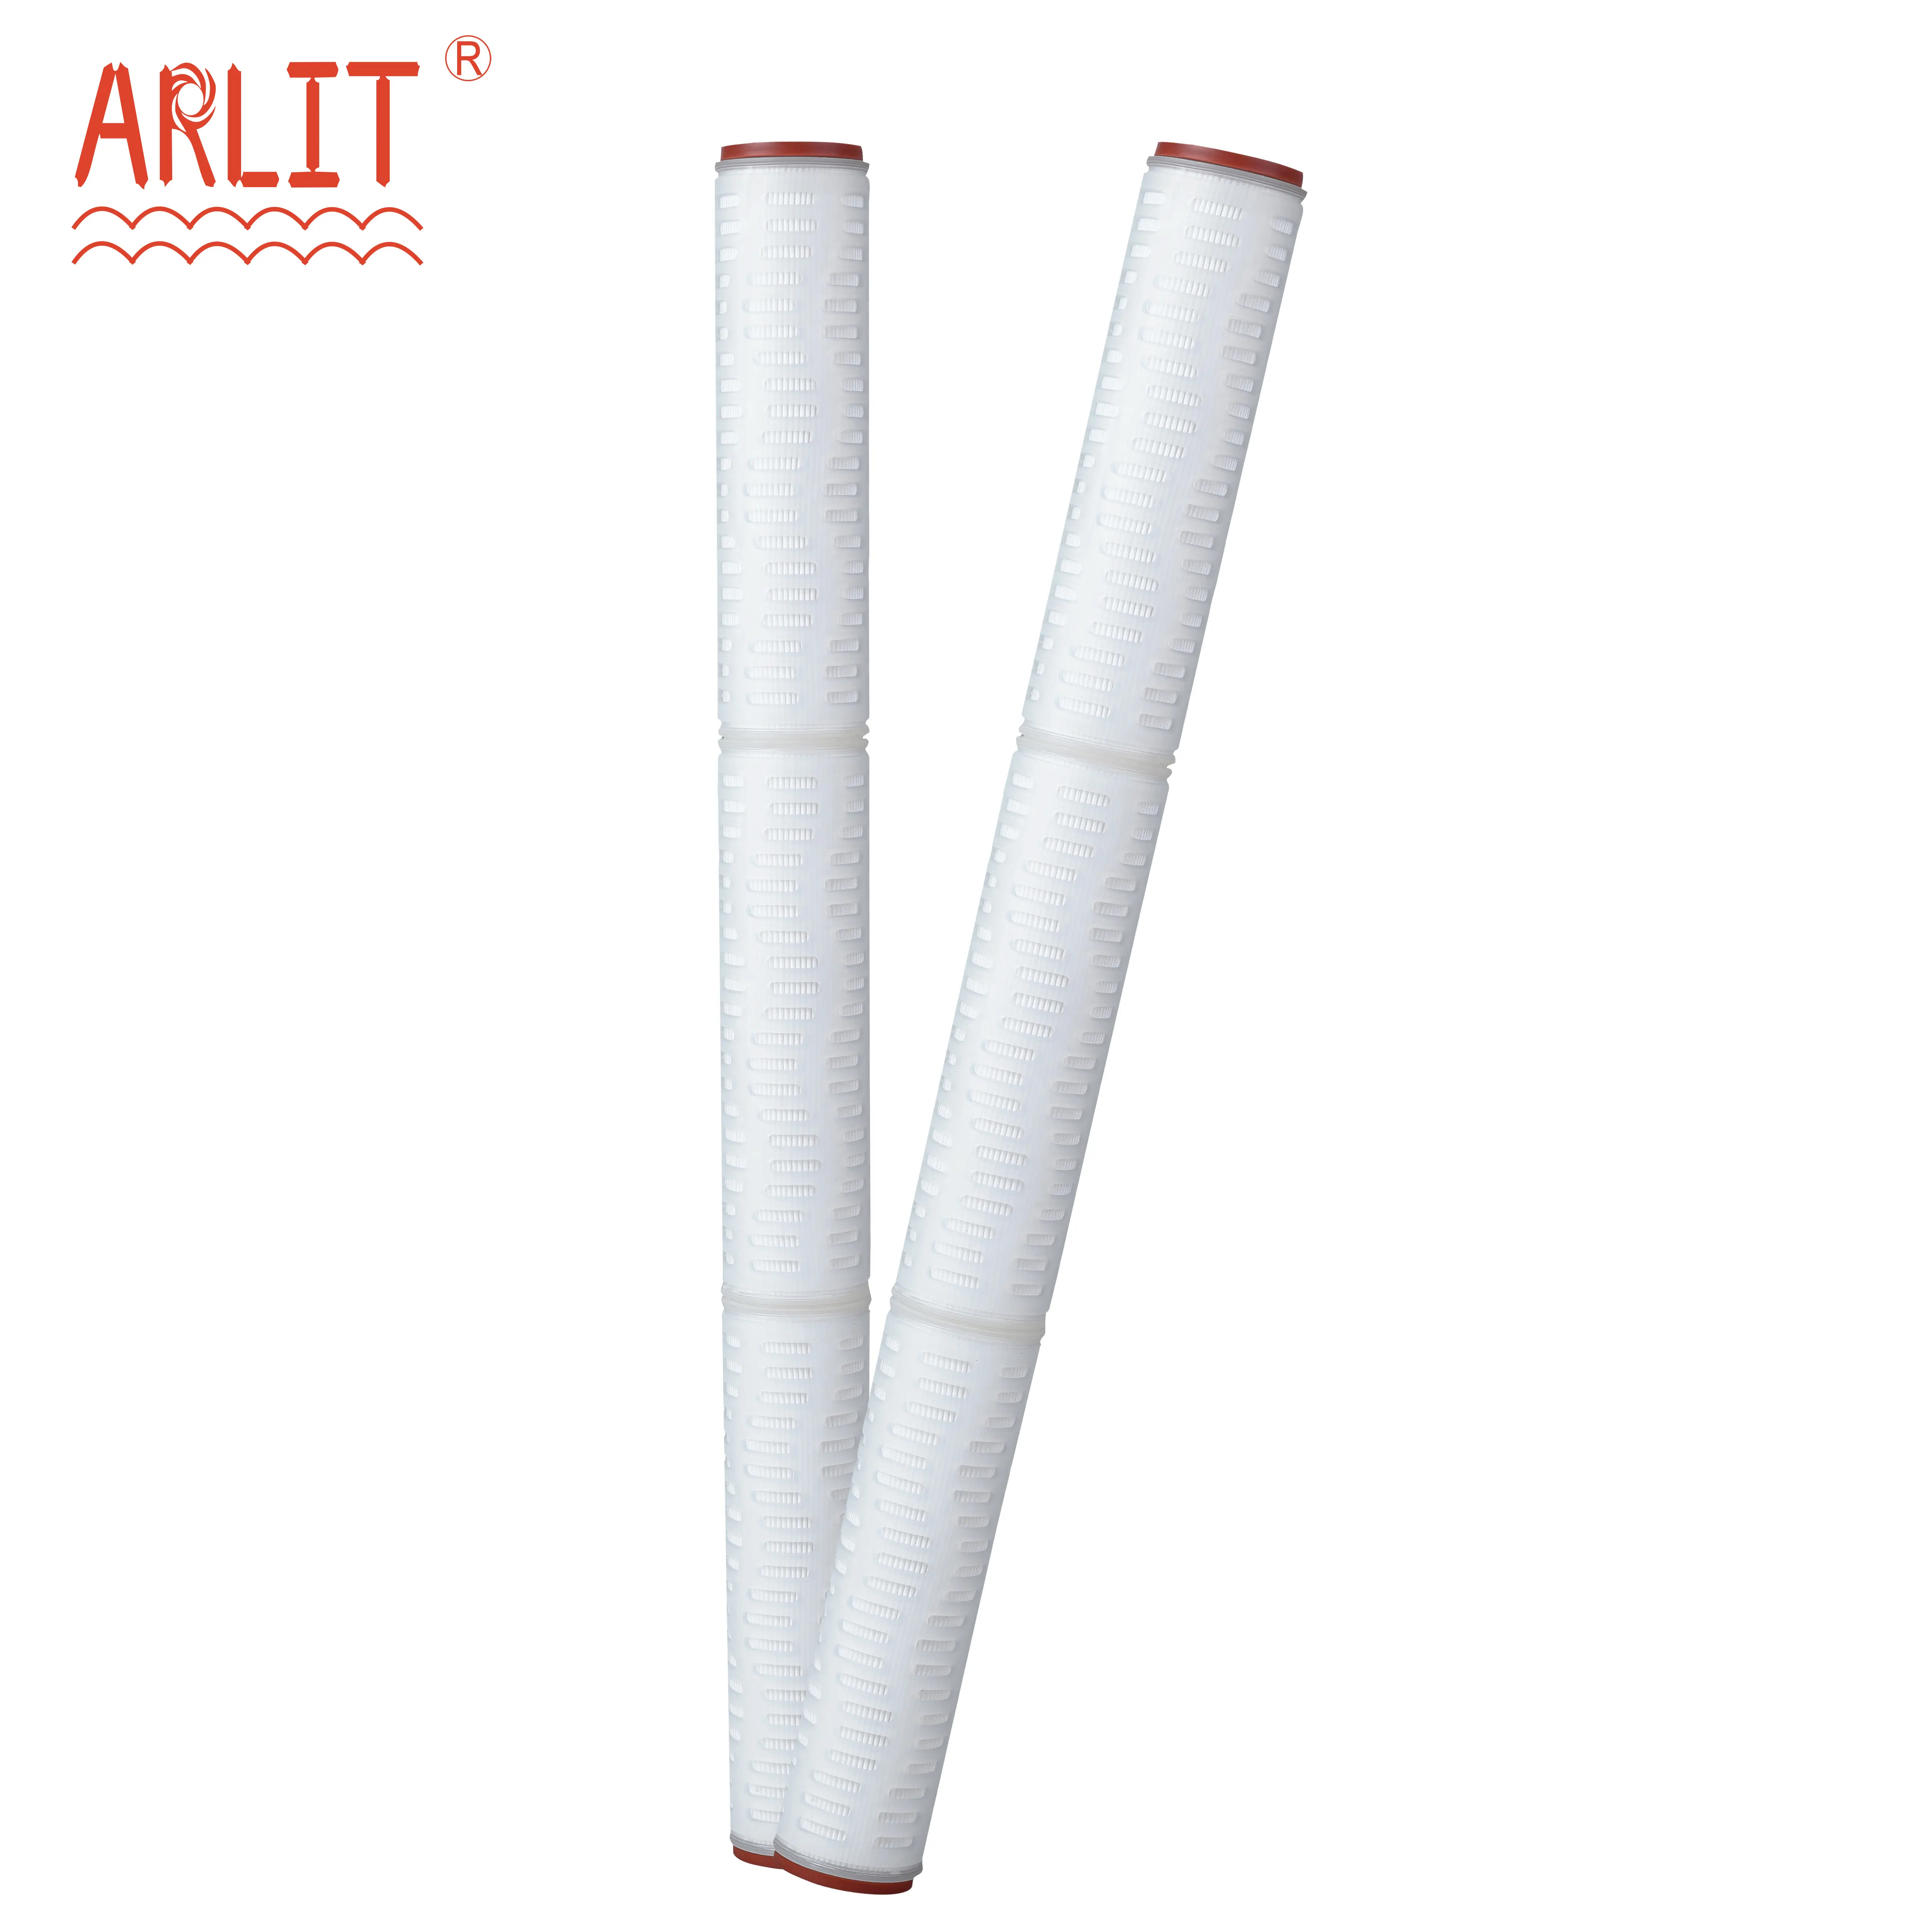 ARLIT BRAND 30 Inch 0.22 Micron Hydrophobic PTFE Membrane Pleated Filter Cartridge for Air Water Filter